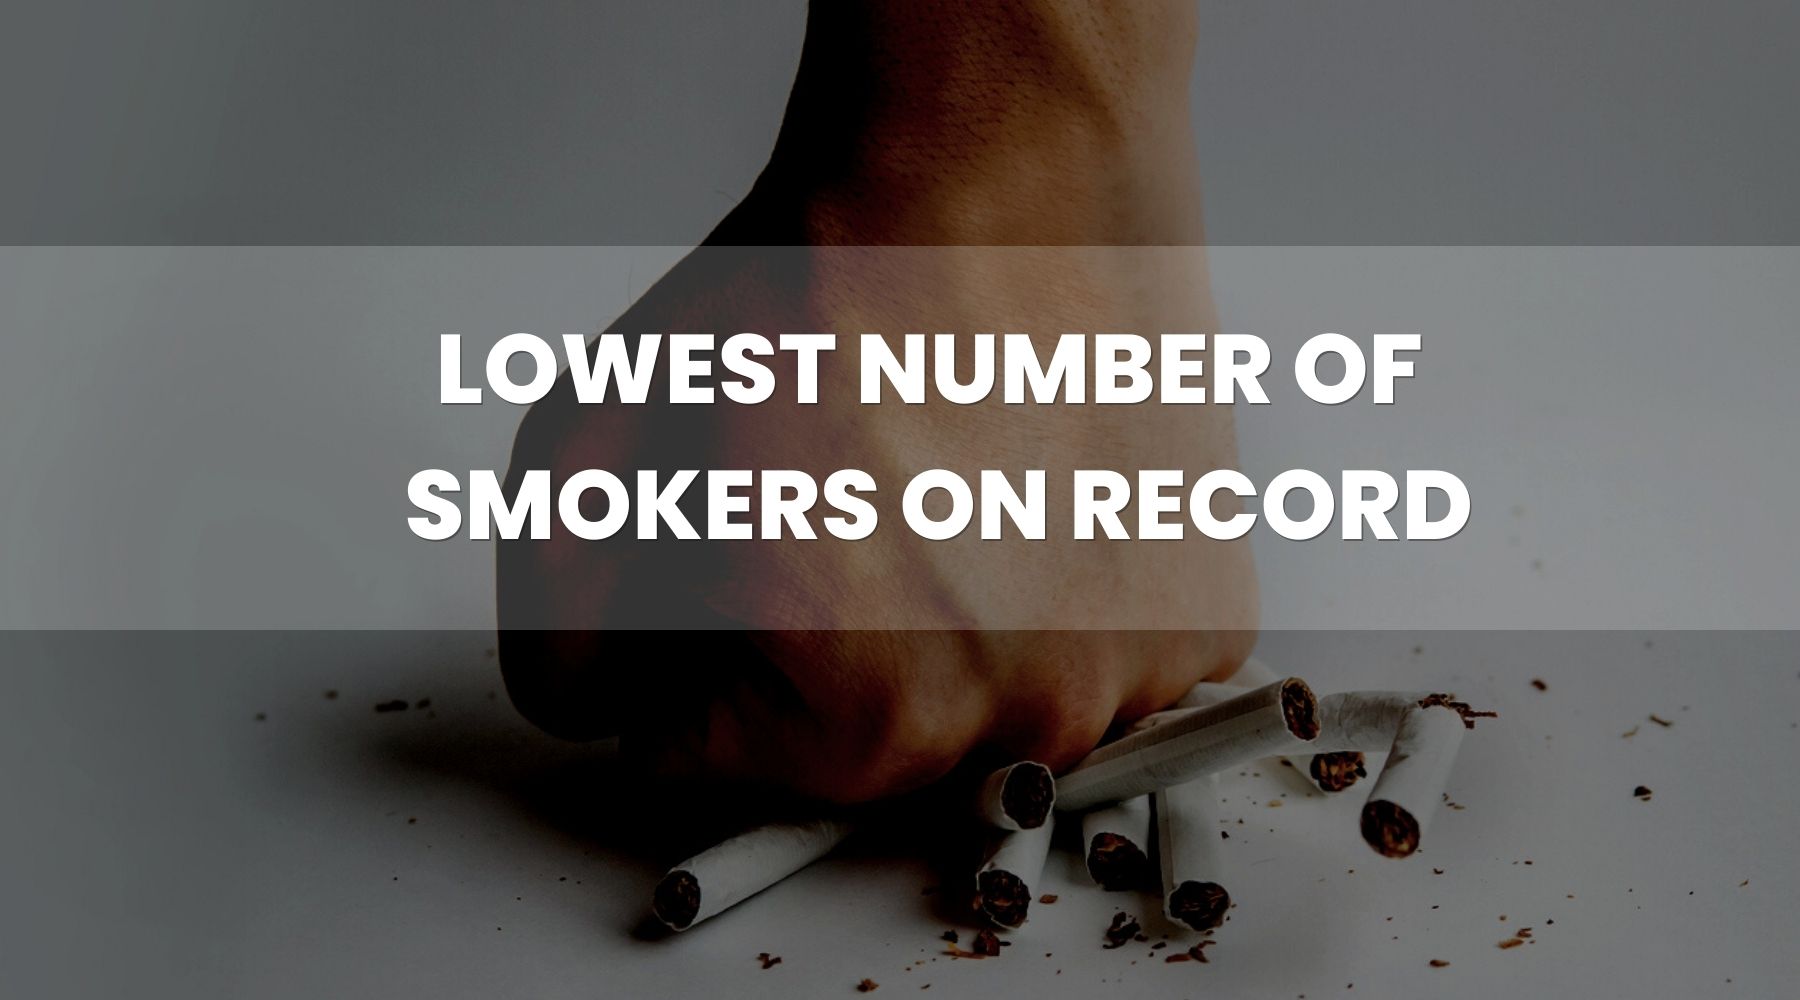 sky-news-reports-lowest-number-of-smokers-on-record